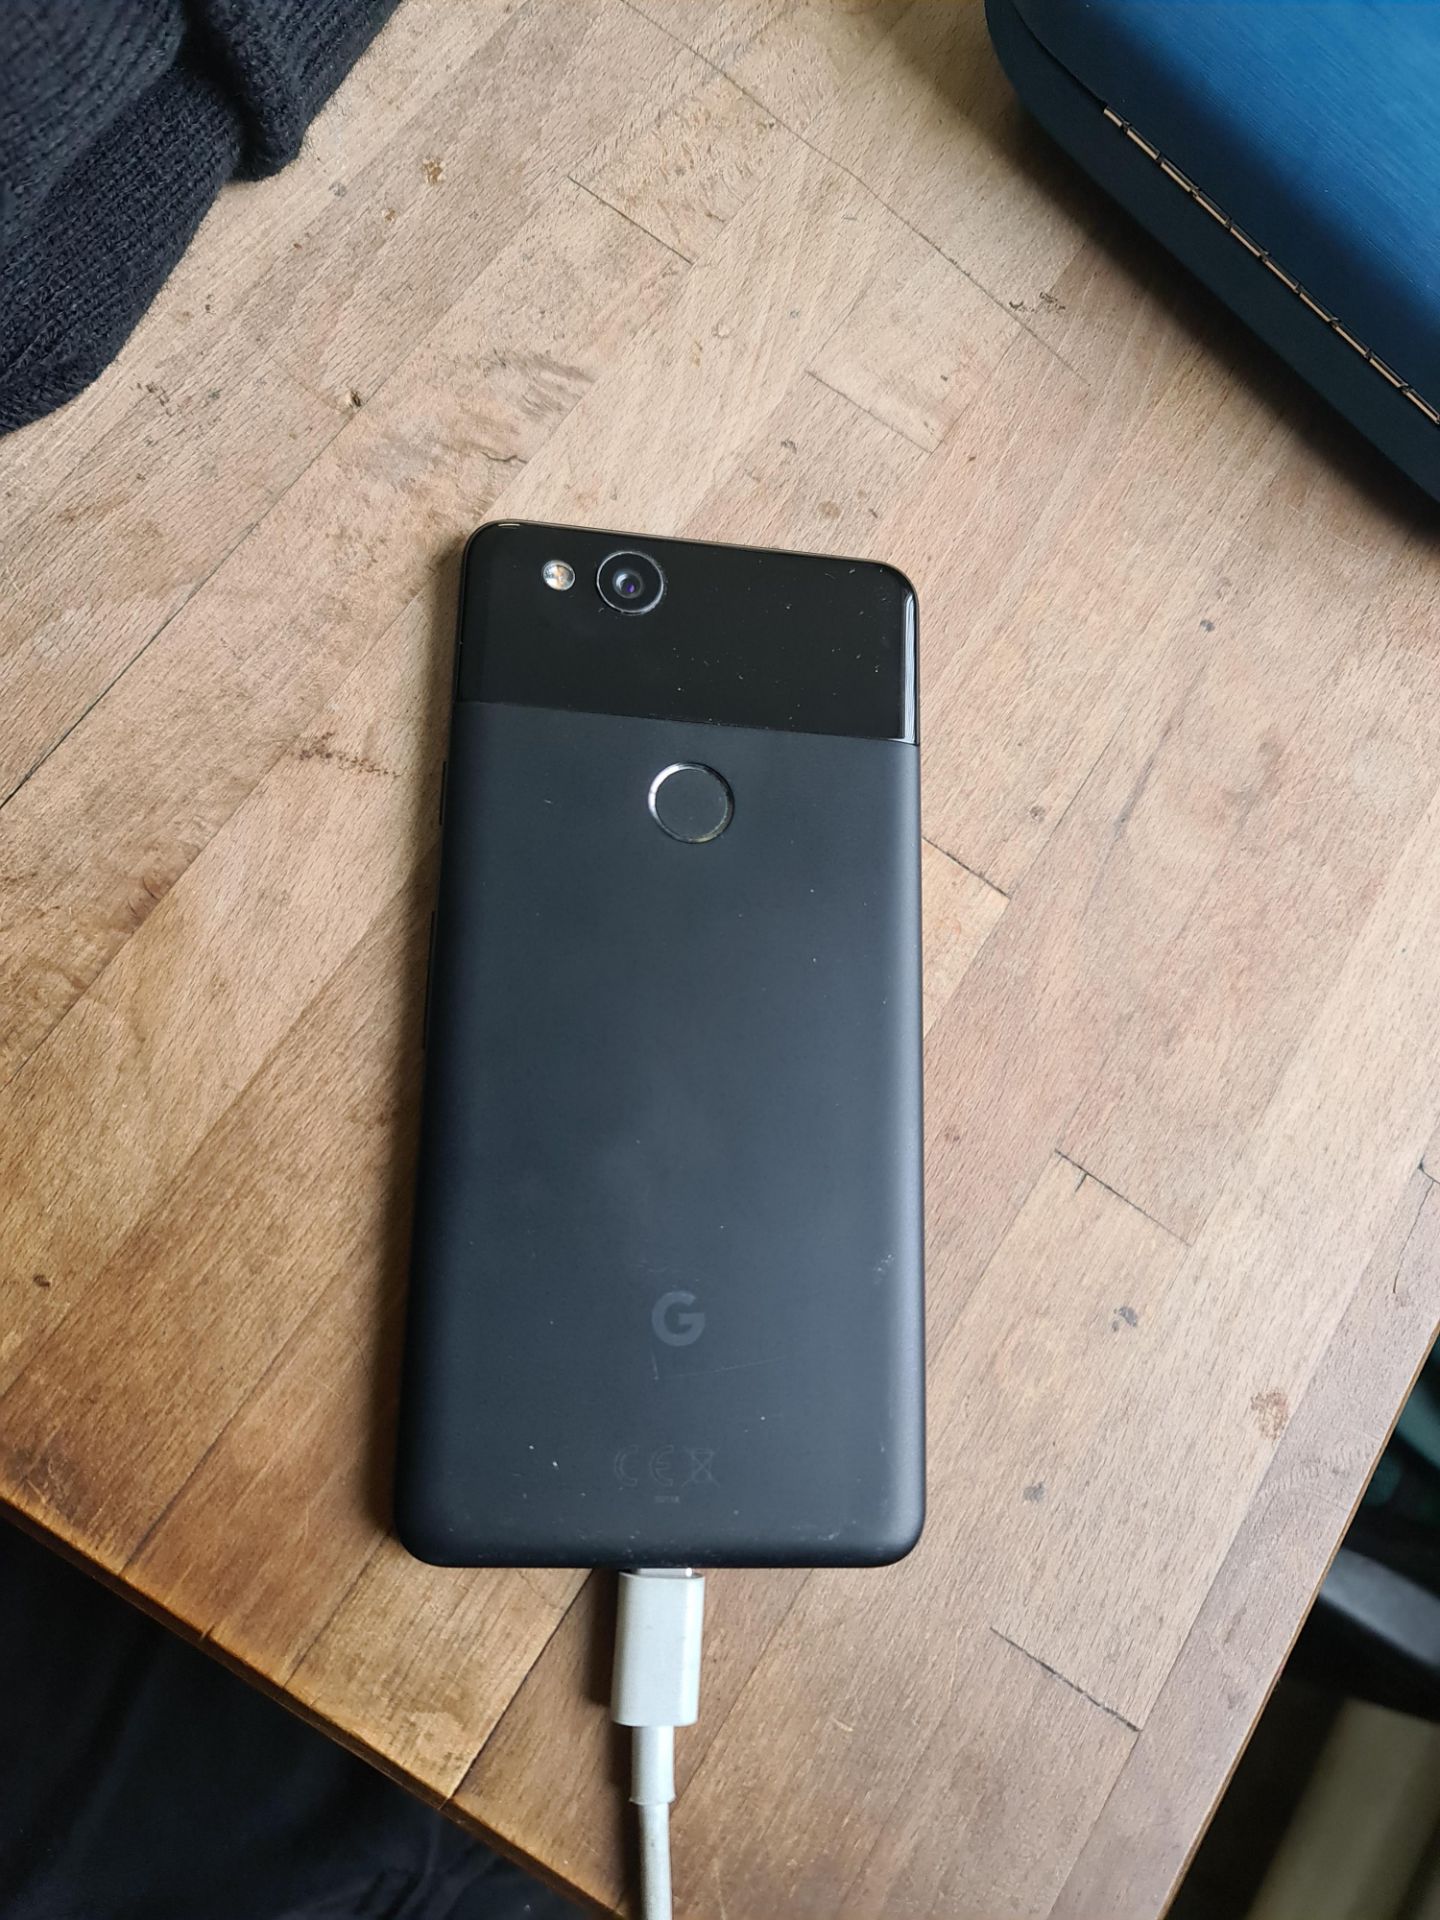 Google Pixel 2 mobile phone with box. - Image 2 of 11